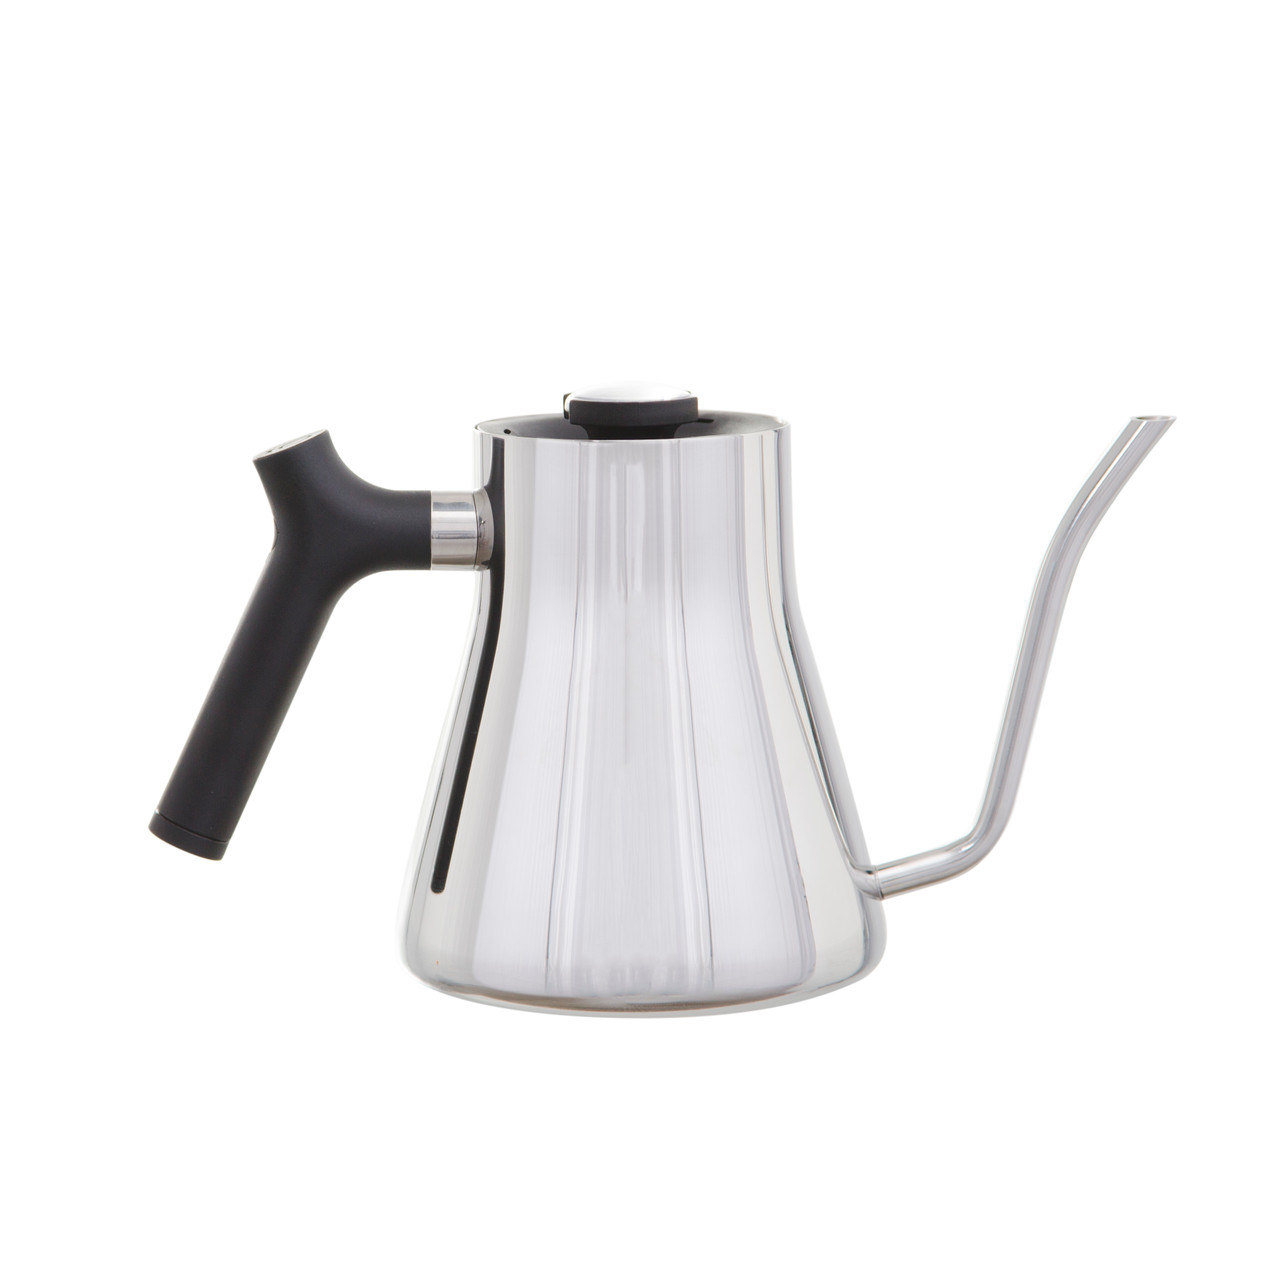 https://cdn11.bigcommerce.com/s-6h7ychjk4/images/stencil/1280x1280/products/8814/88878/fellow-stagg-kettle-steel__55241.1601930275.jpg?c=1&imbypass=on